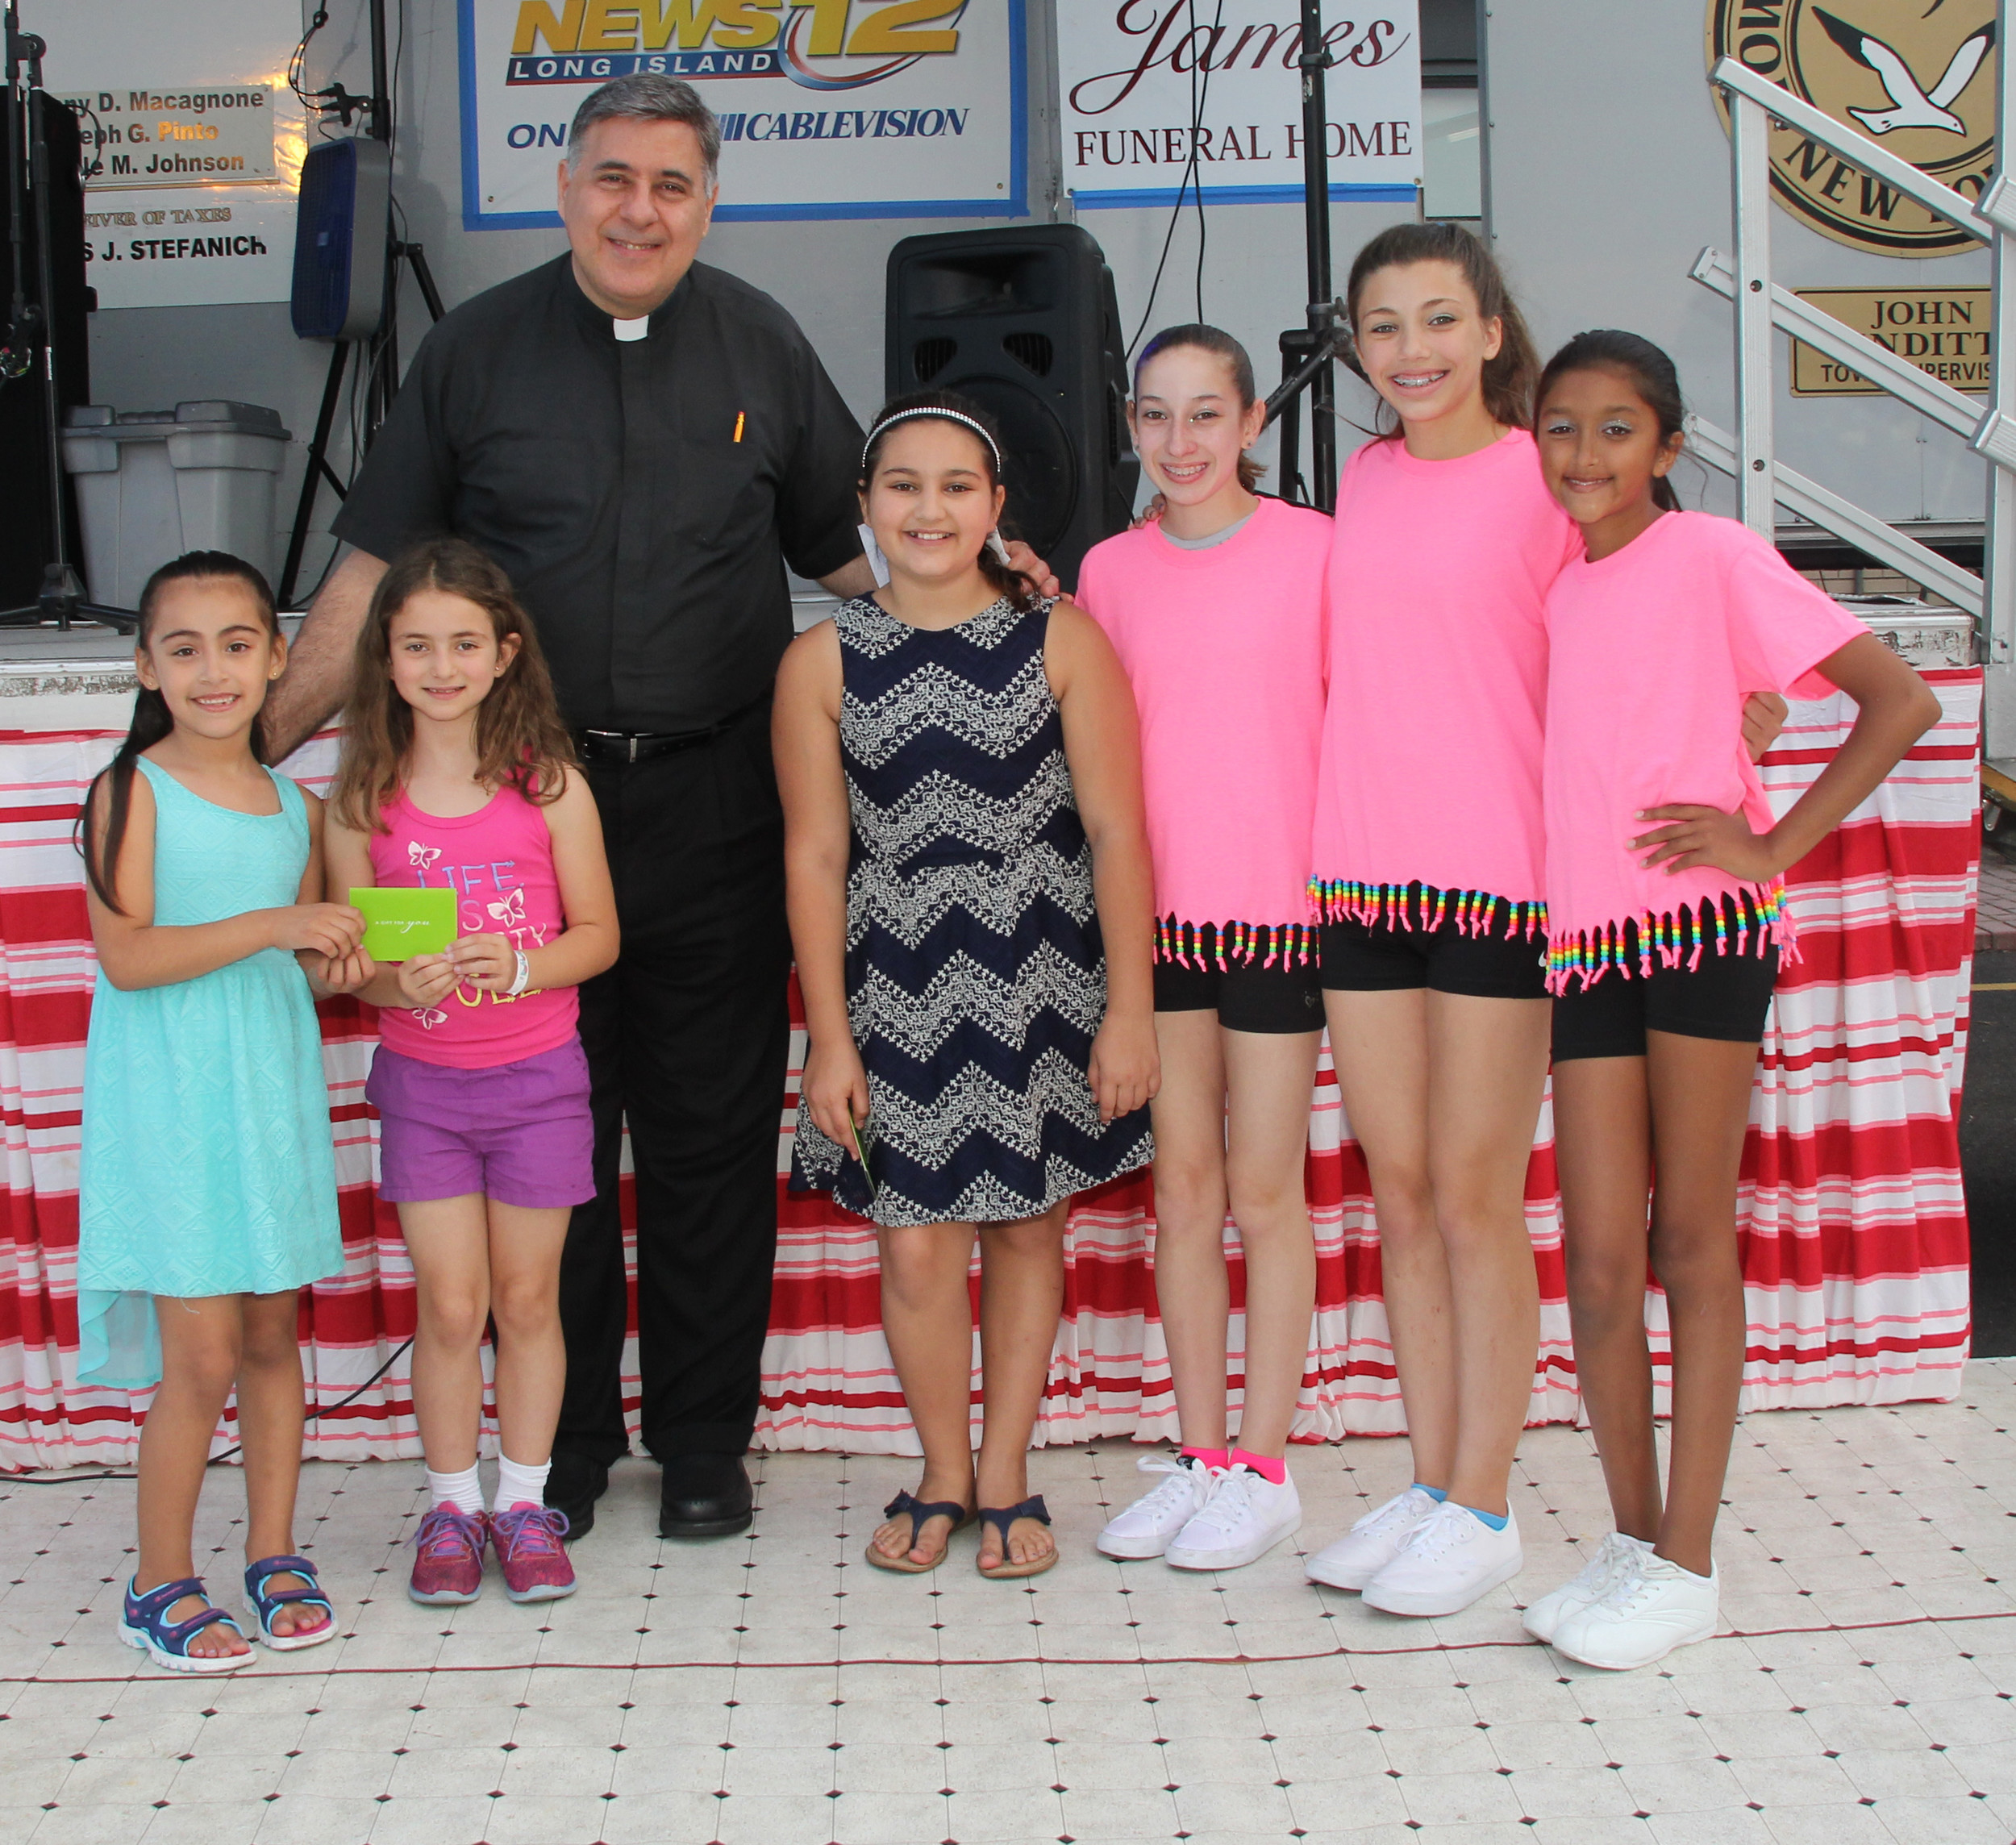 Maria Regina’s Got Talent winners with the Rev. Frank Nelson, pastor were, from left, Sophia Rose Alfieri and Ava Avruzzo (third place) Gabriella Orlando (first place) and Jamie Barrett, Corrine Winter and Savannah Kelter (second place).